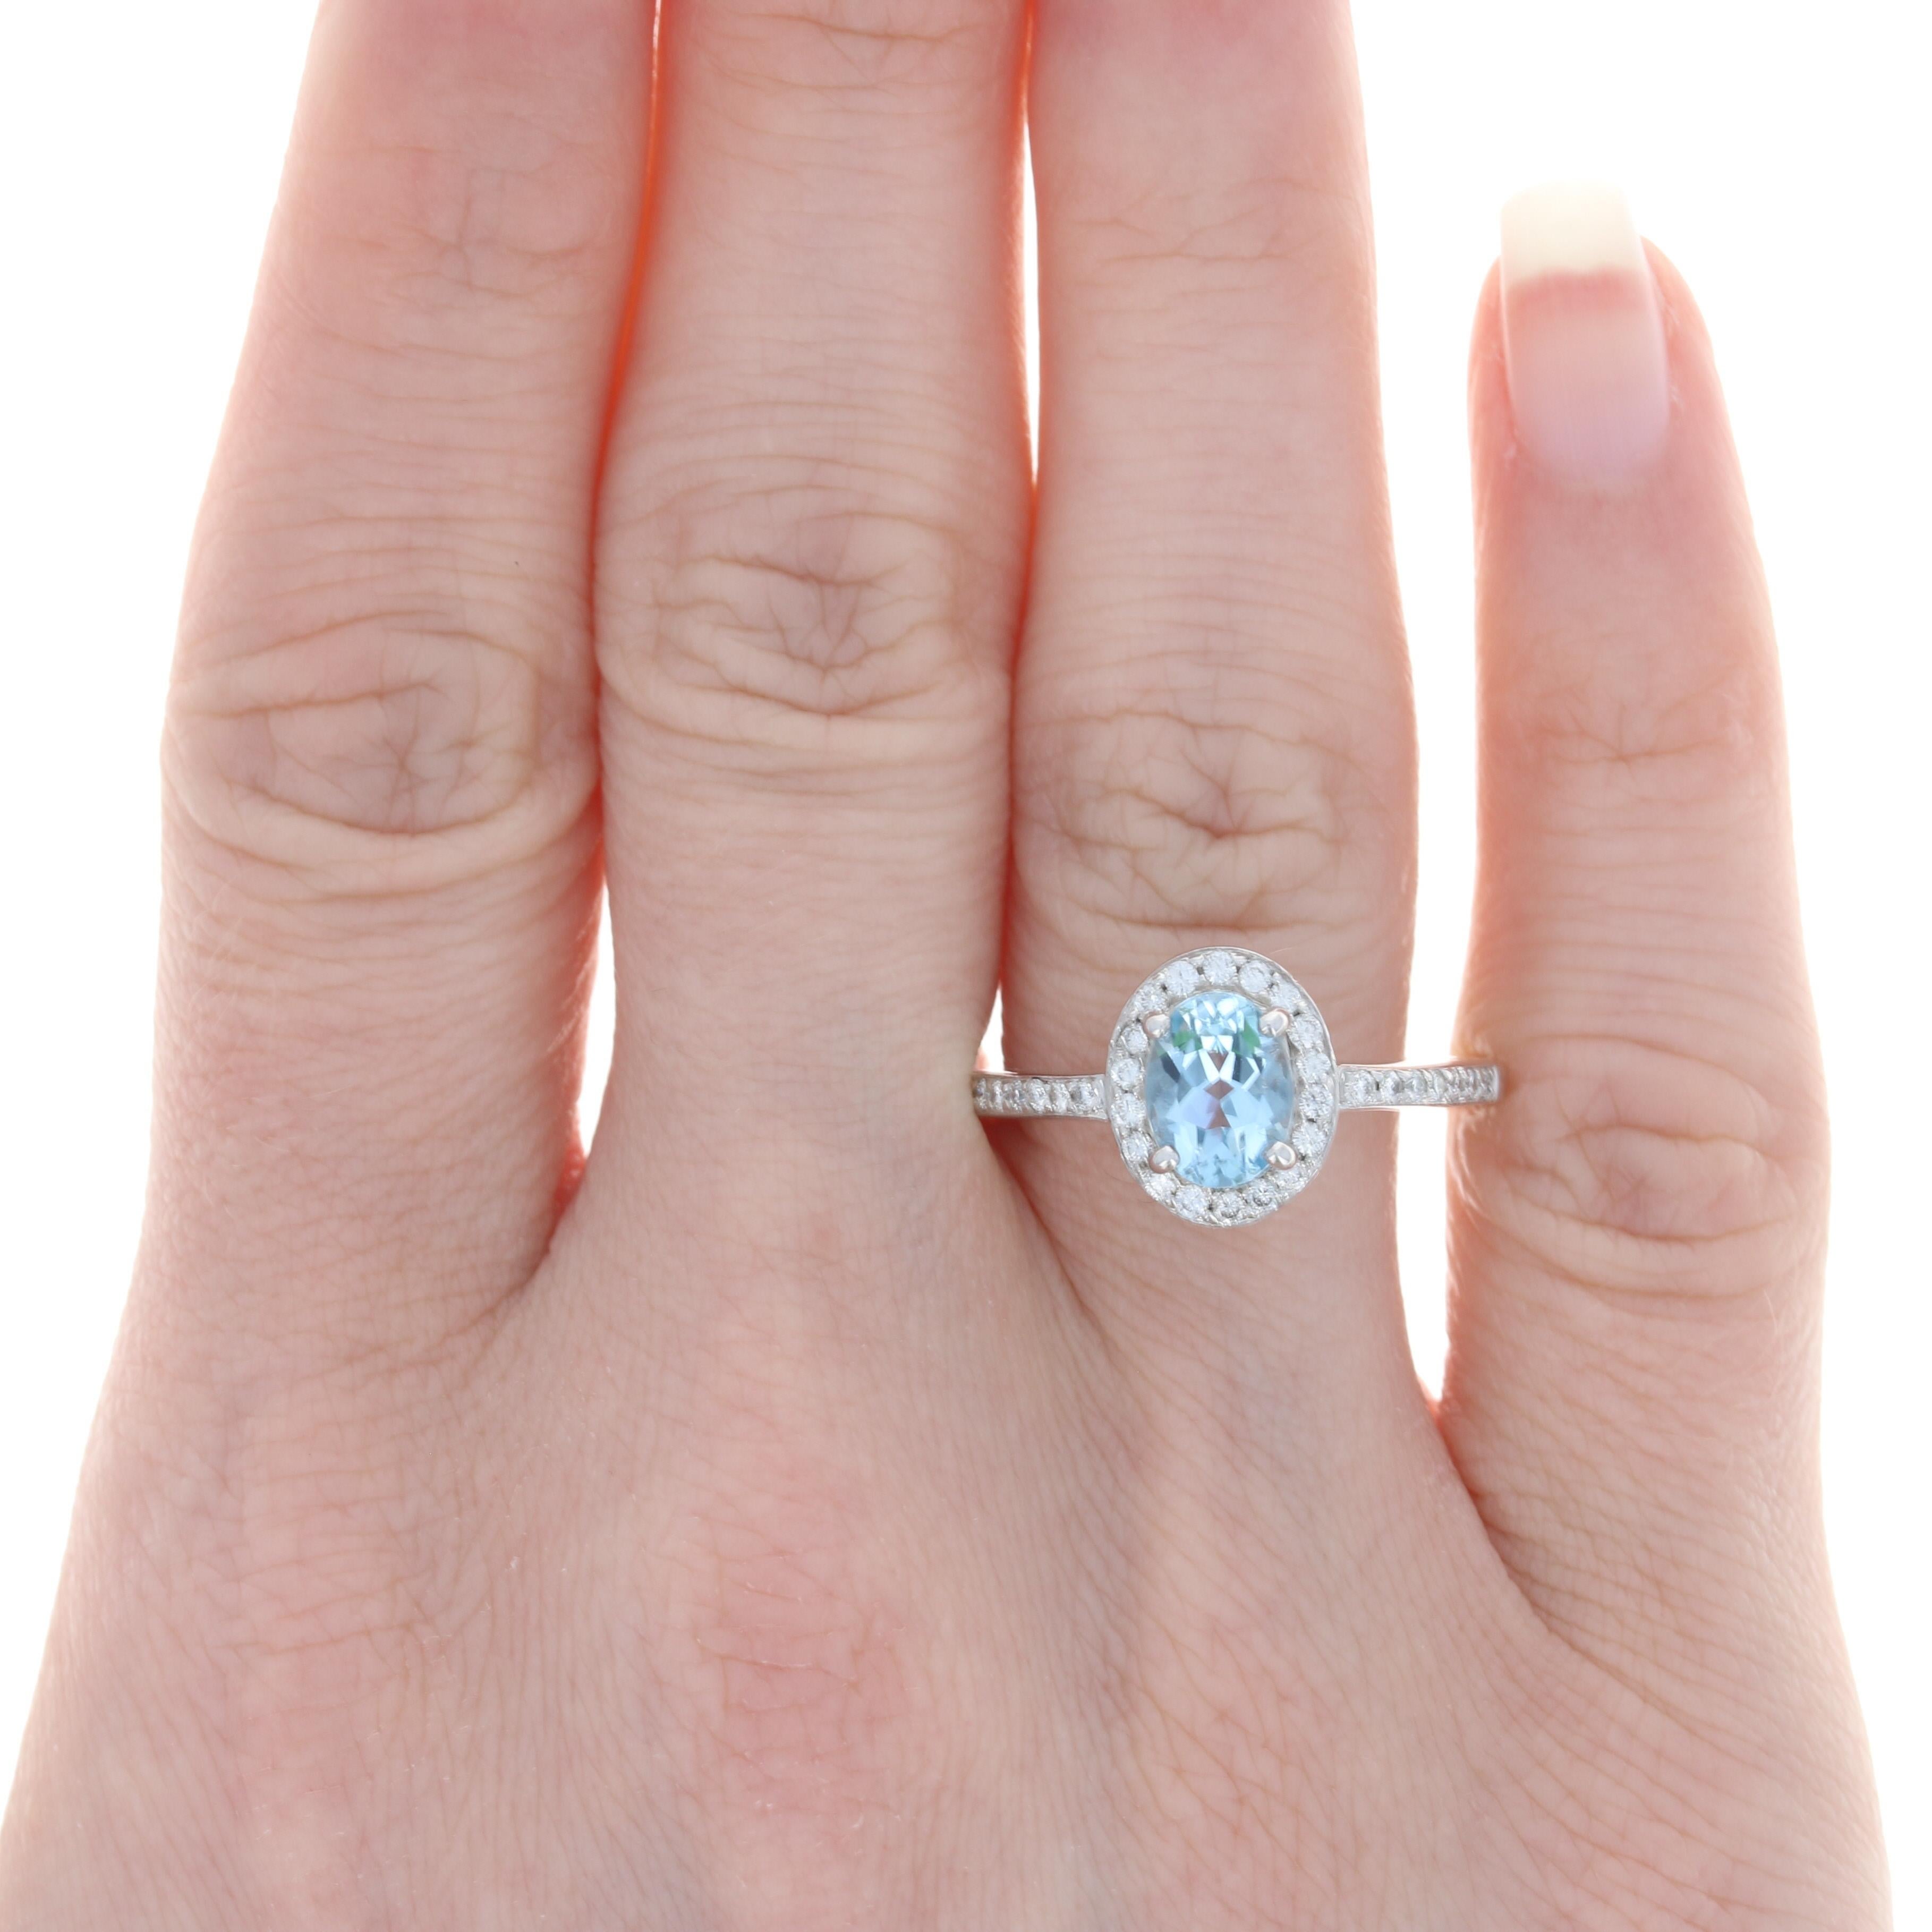 Size: 8 1/4
Sizing Fee: Can be sized down 1 size or up 2 sizes for $25

Metal Content: 14k White Gold 

Stone Information: 
Genuine Aquamarine
Treatment: Heating
Carat: 1.06ct (weighed) 
Cut: Oval
Color: Blue
Size: 7.8mm x 5.9mm

Natural